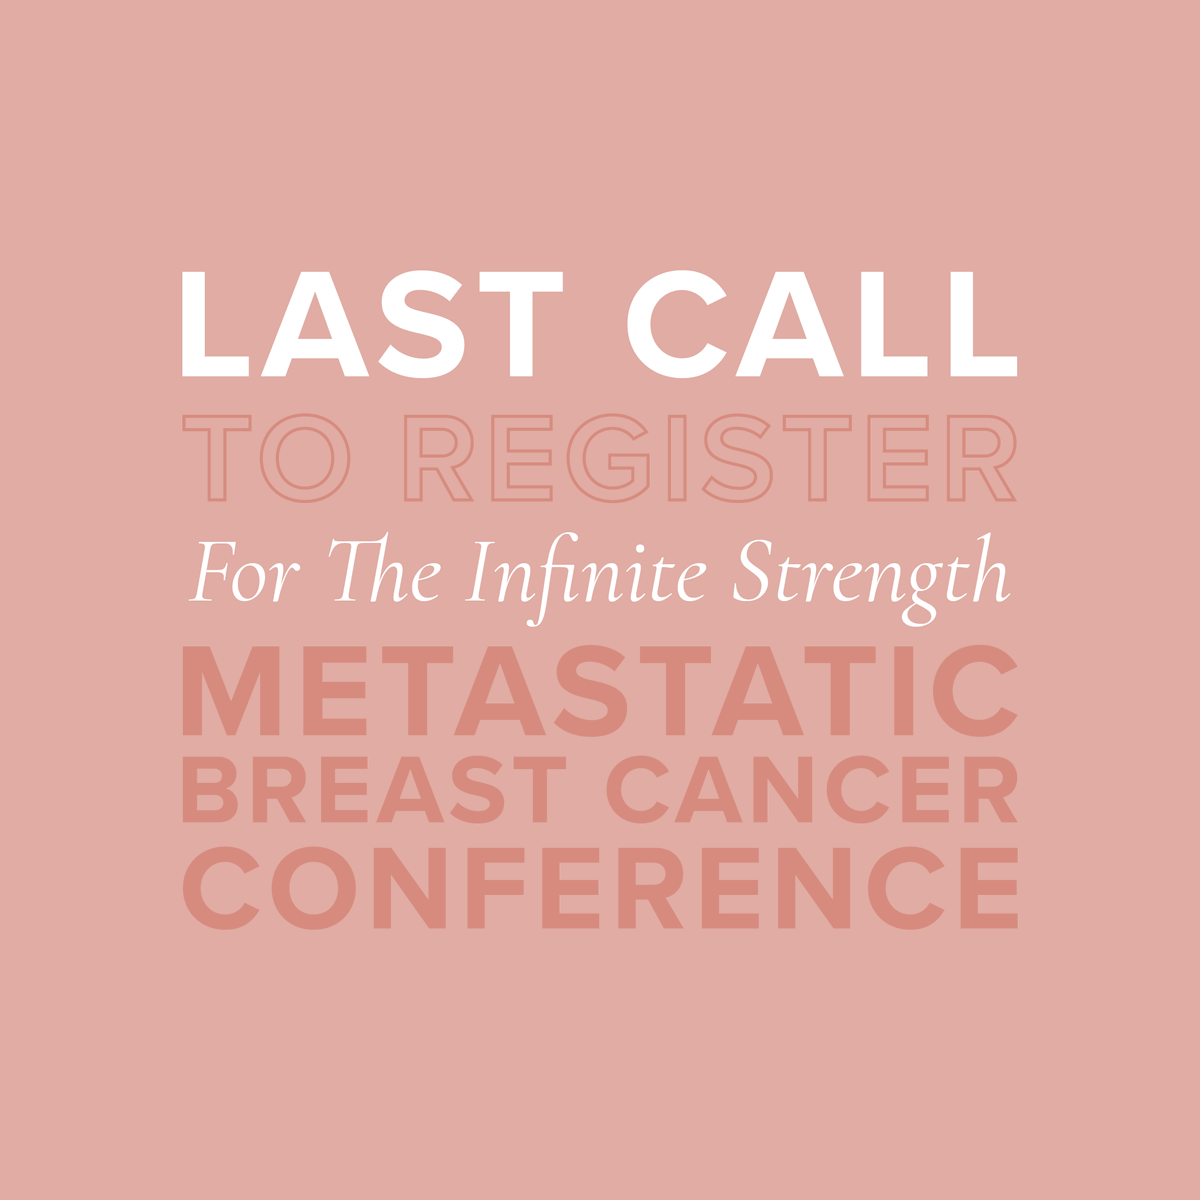 We can't believe how close our first ever Metastatic Breast Cancer Conference is. We have 10 spots left, so if you plan to attend and have not registered, this week is your last chance! Click here to reserve your spot by Friday, March 1st: MBCConference.givesmart.com